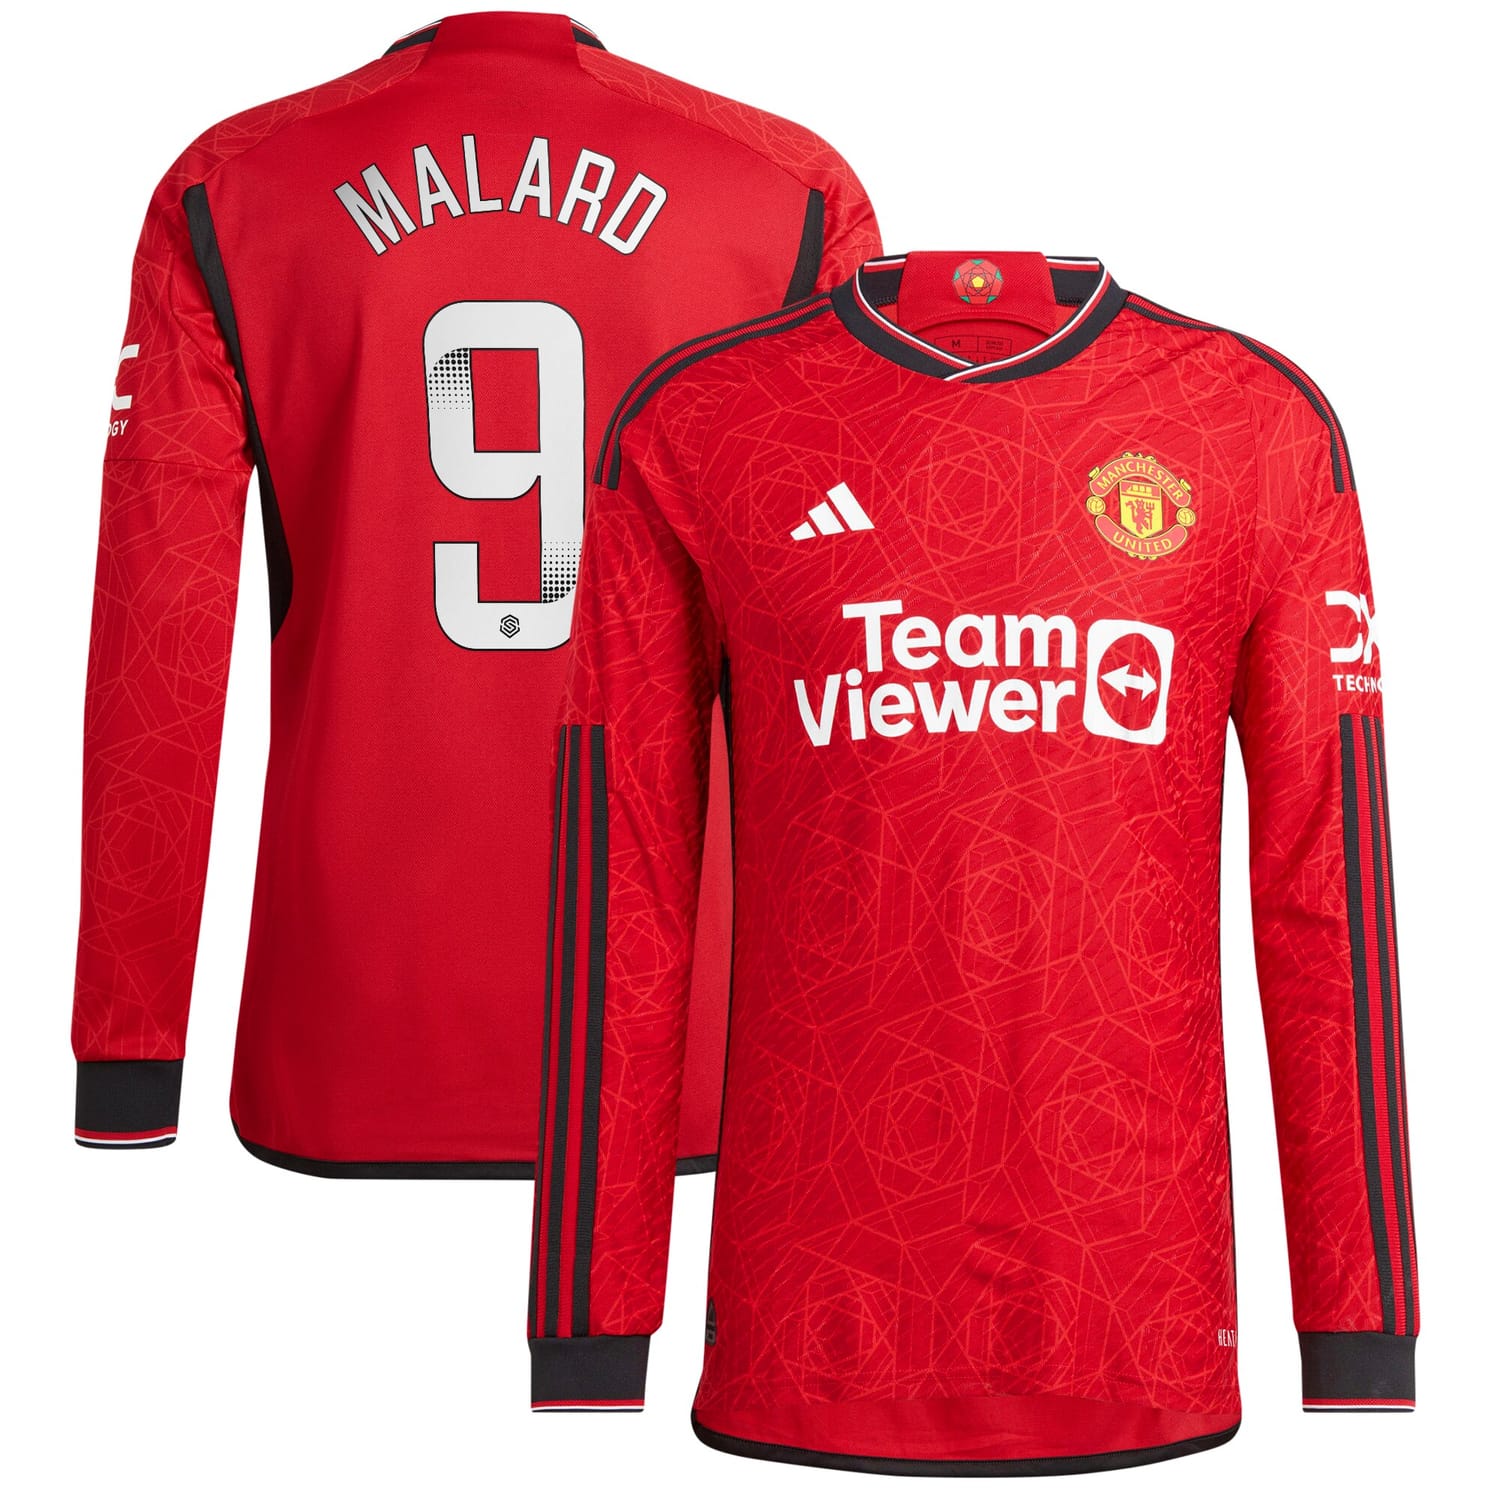 Premier League Manchester United Home WSL Authentic Jersey Shirt Long Sleeve 2023-24 player Melvine Malard printing for Men